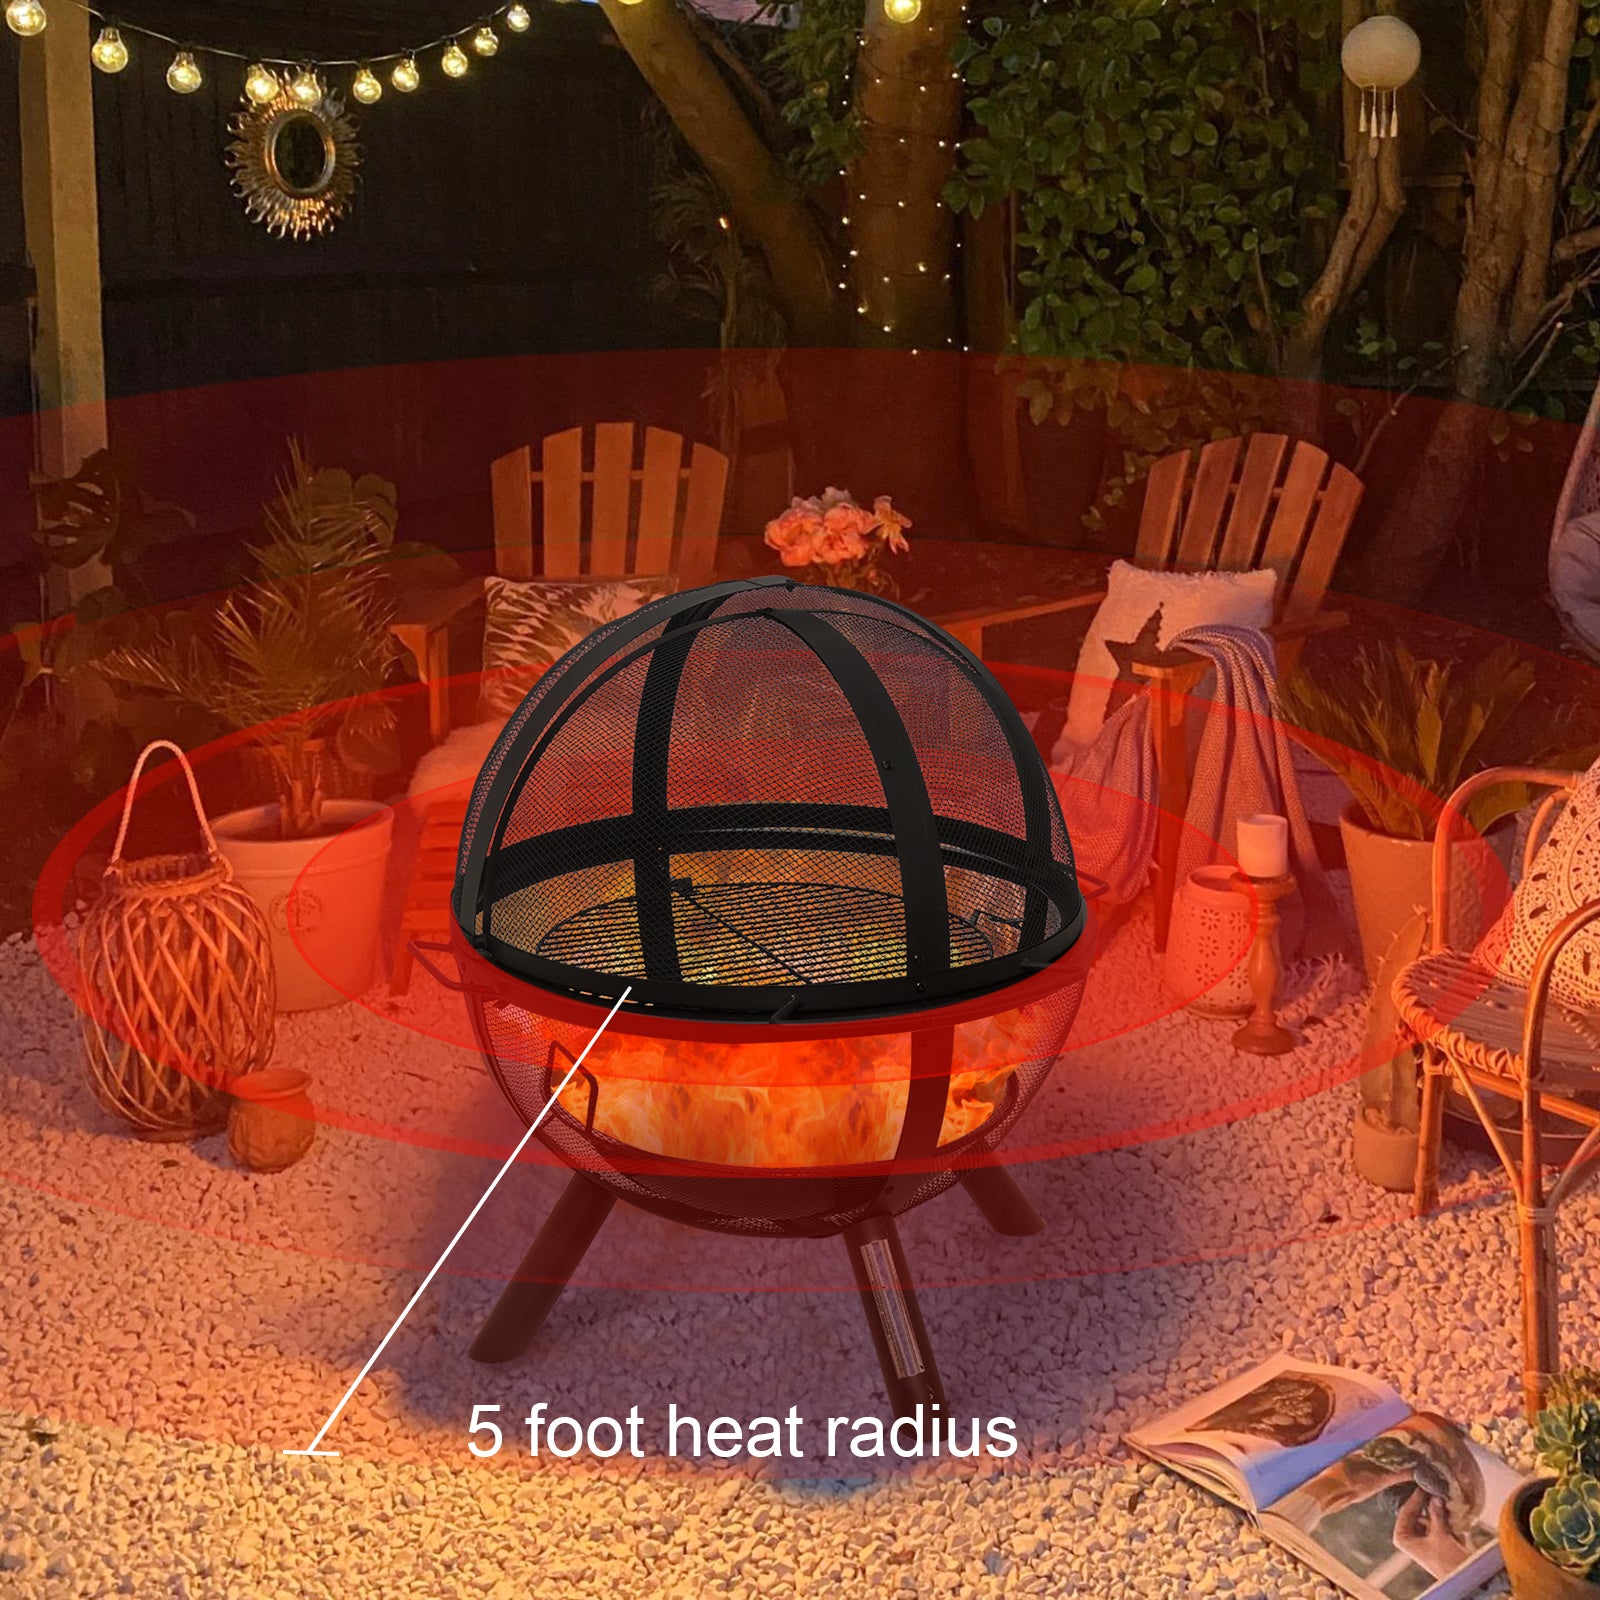 Ball Style Fire Pit Ball Of Fire with Bbq Grill